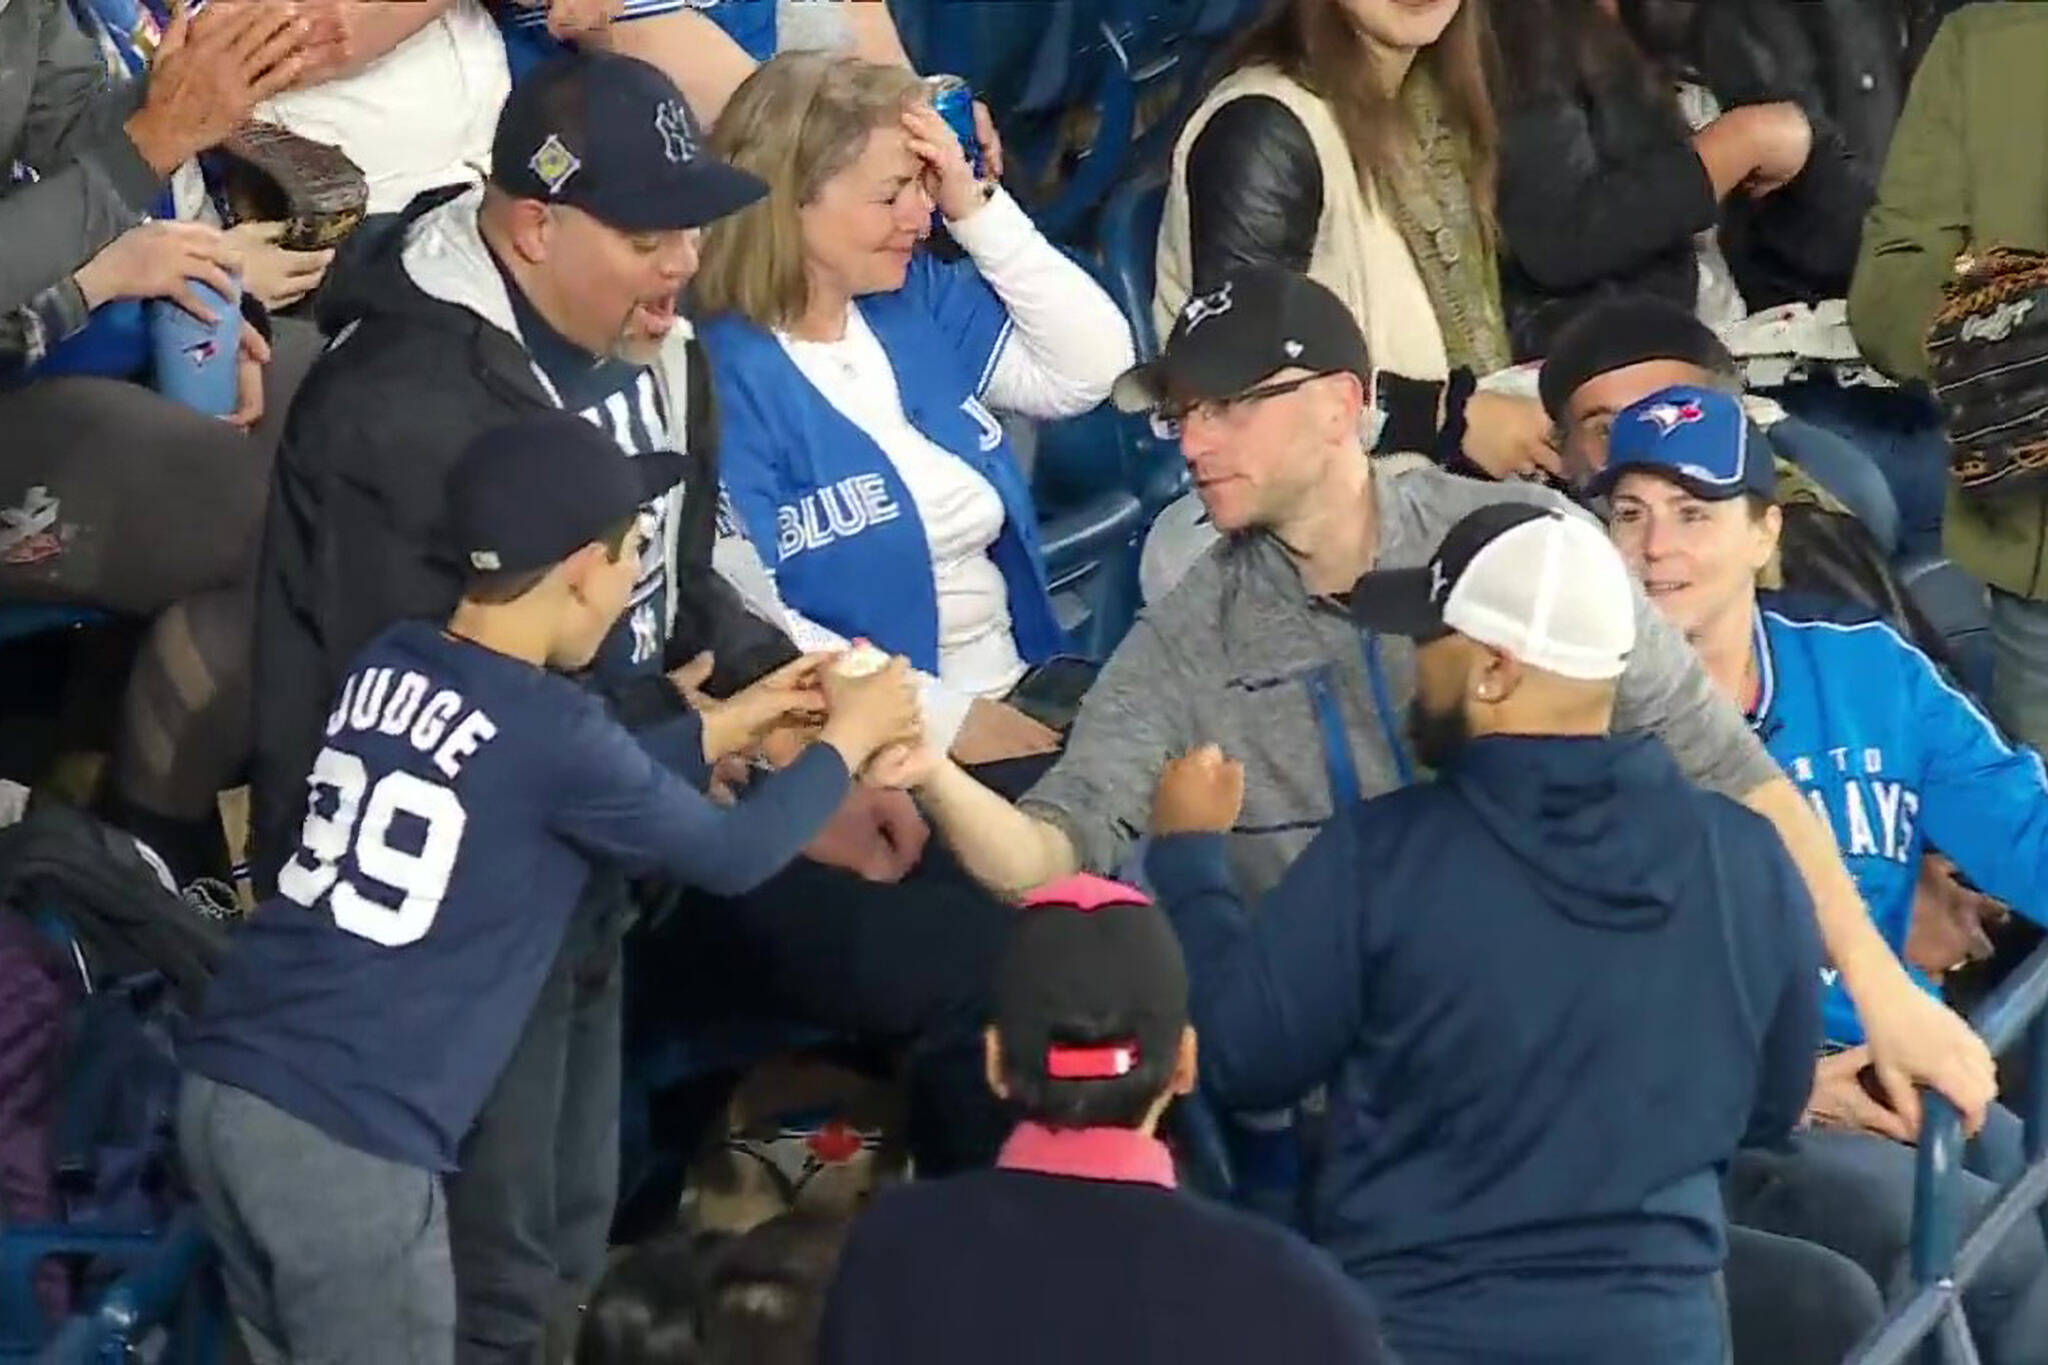 A young fan had their day made in the cutest way at a Toronto Blue